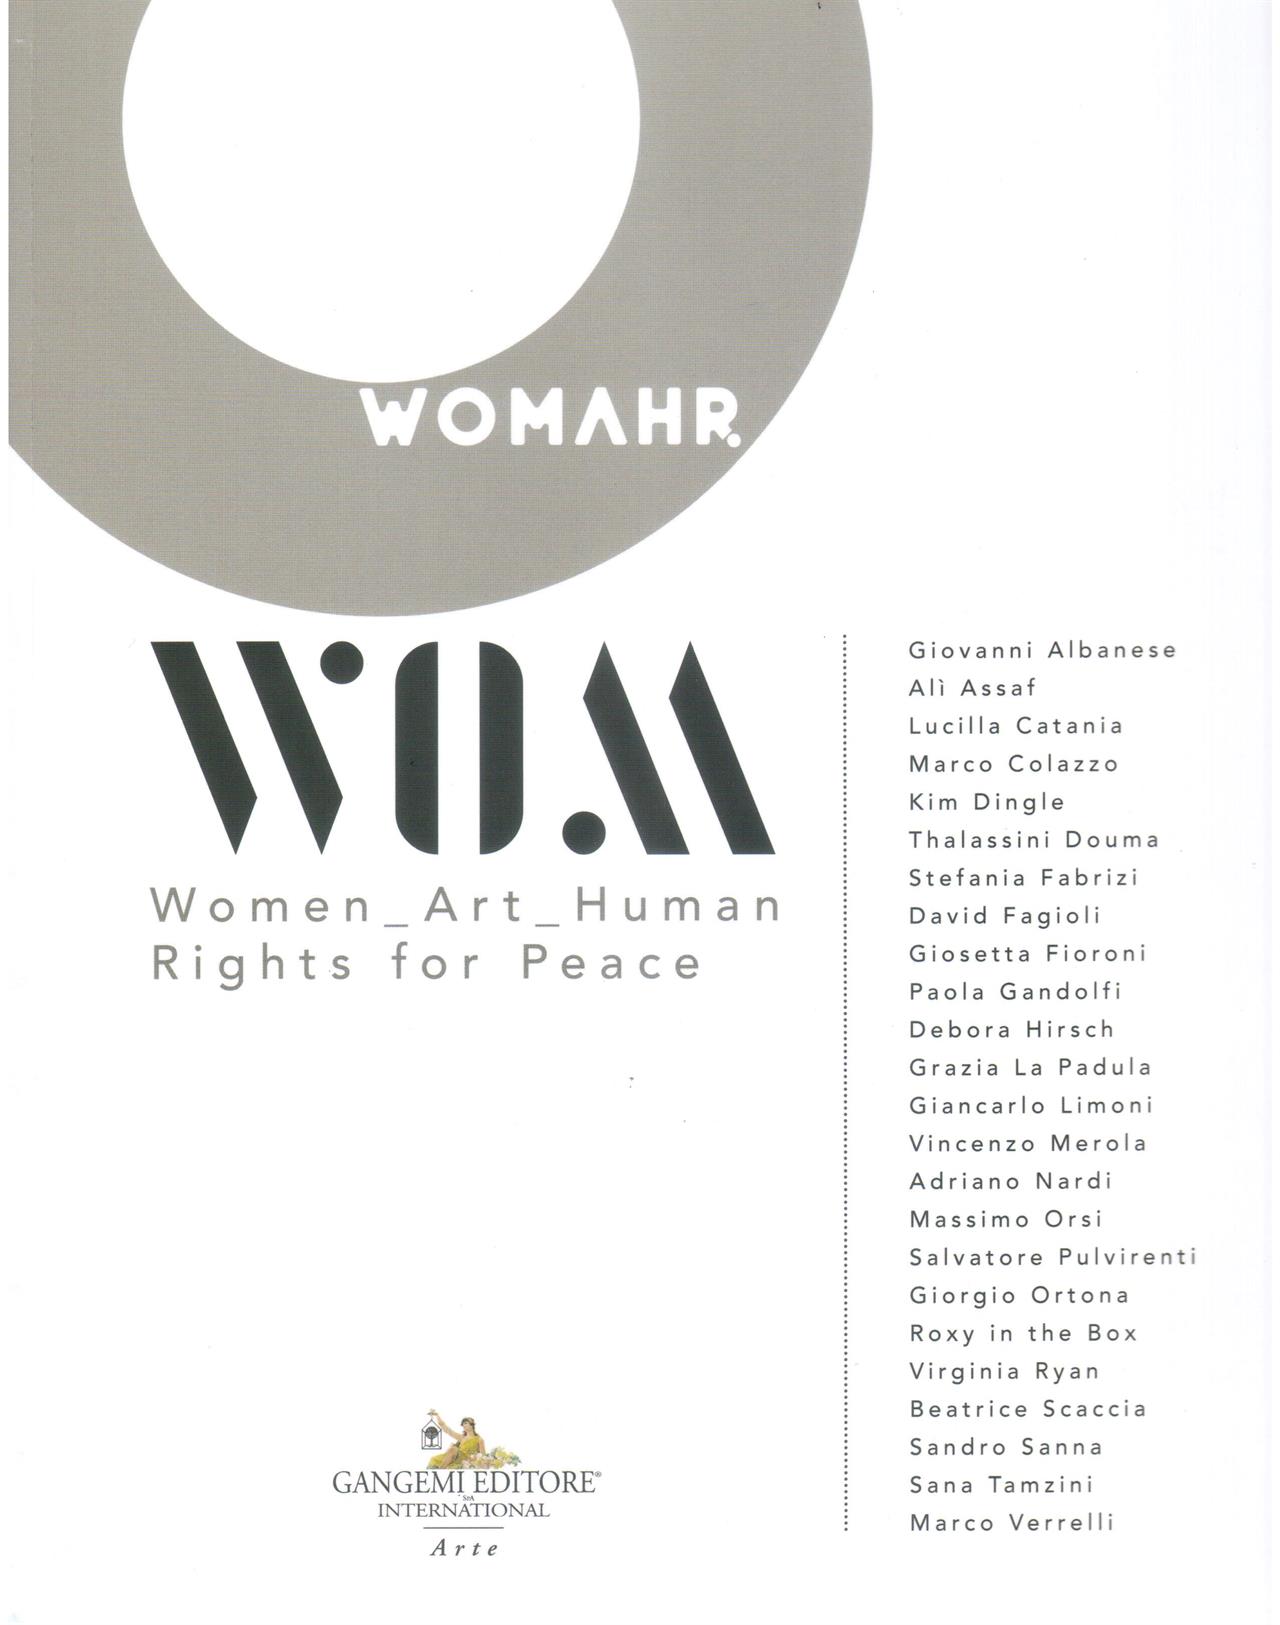 WOHAHR. Women_Art_Human Rights for Peace